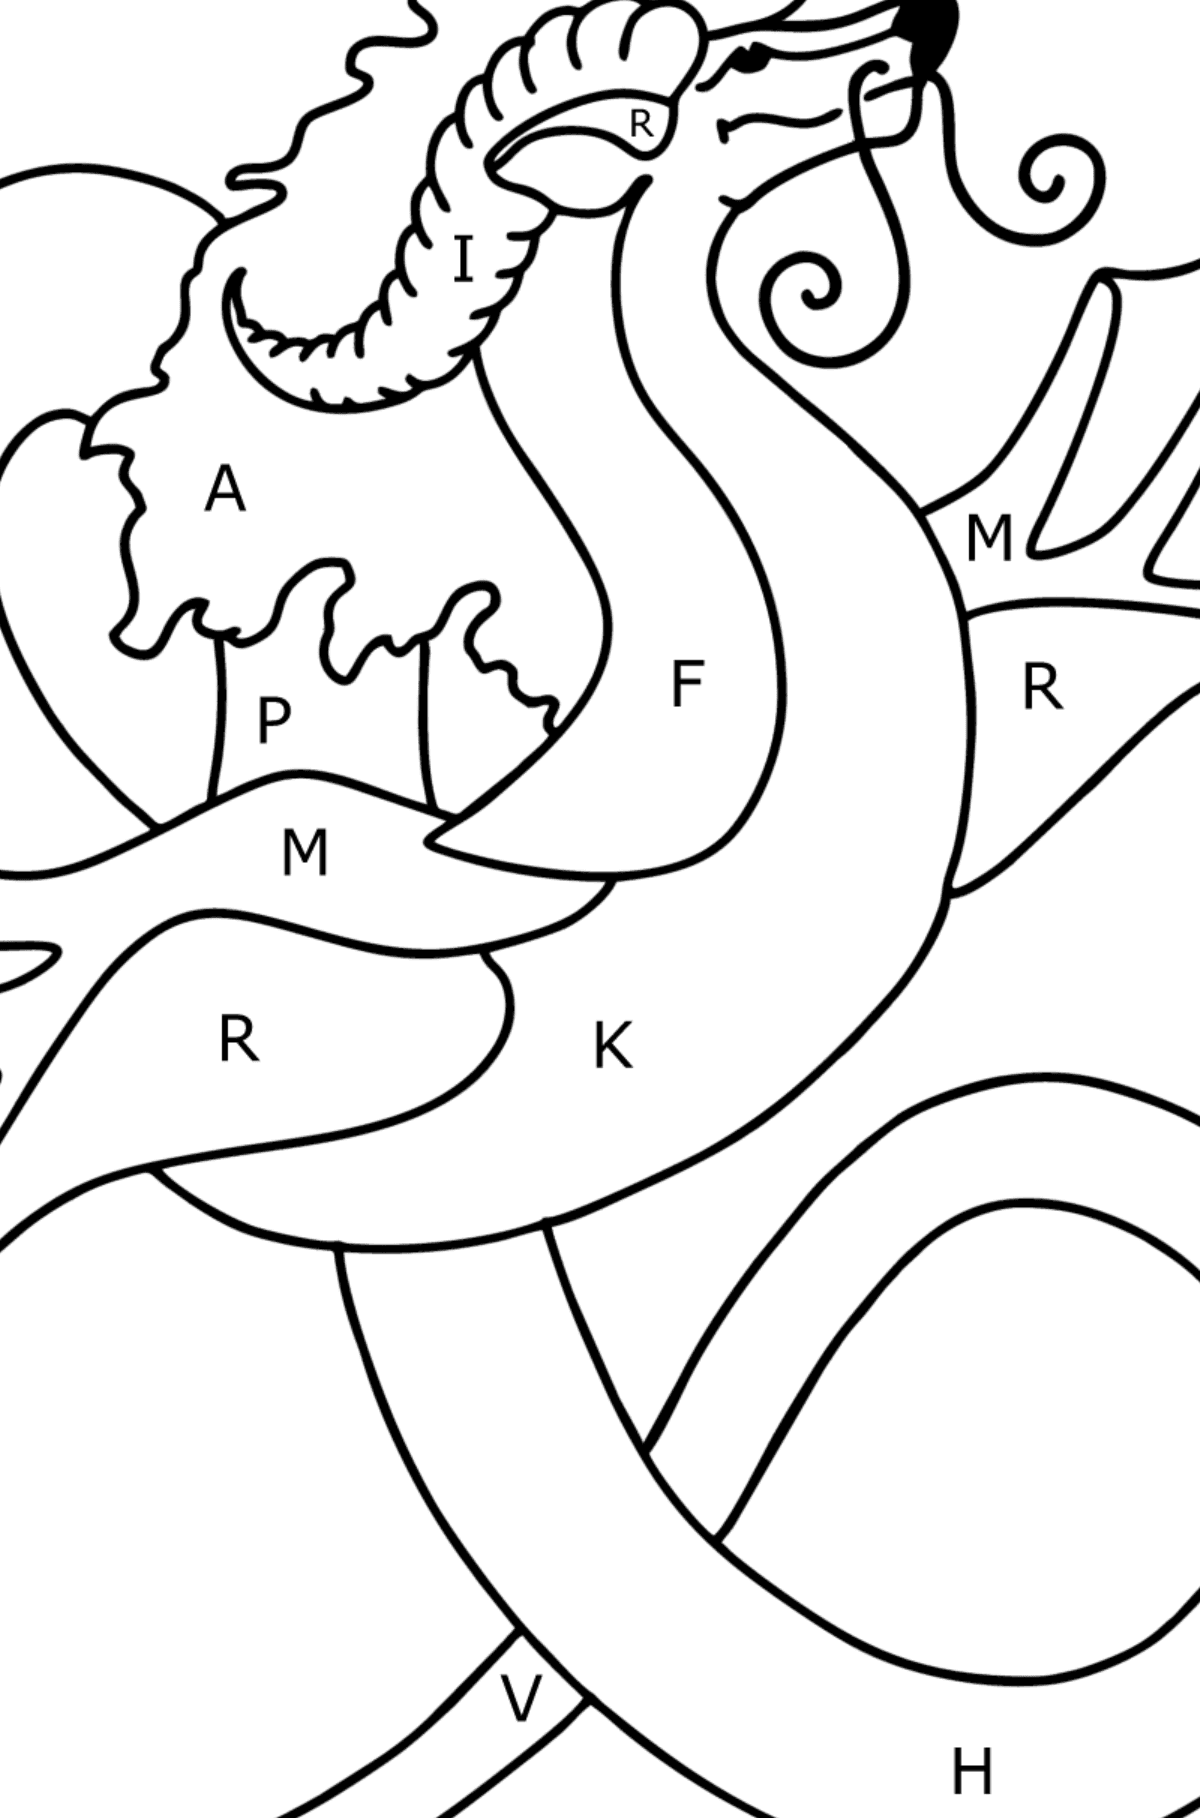 Flying Dragon coloring page - Coloring by Letters for Kids